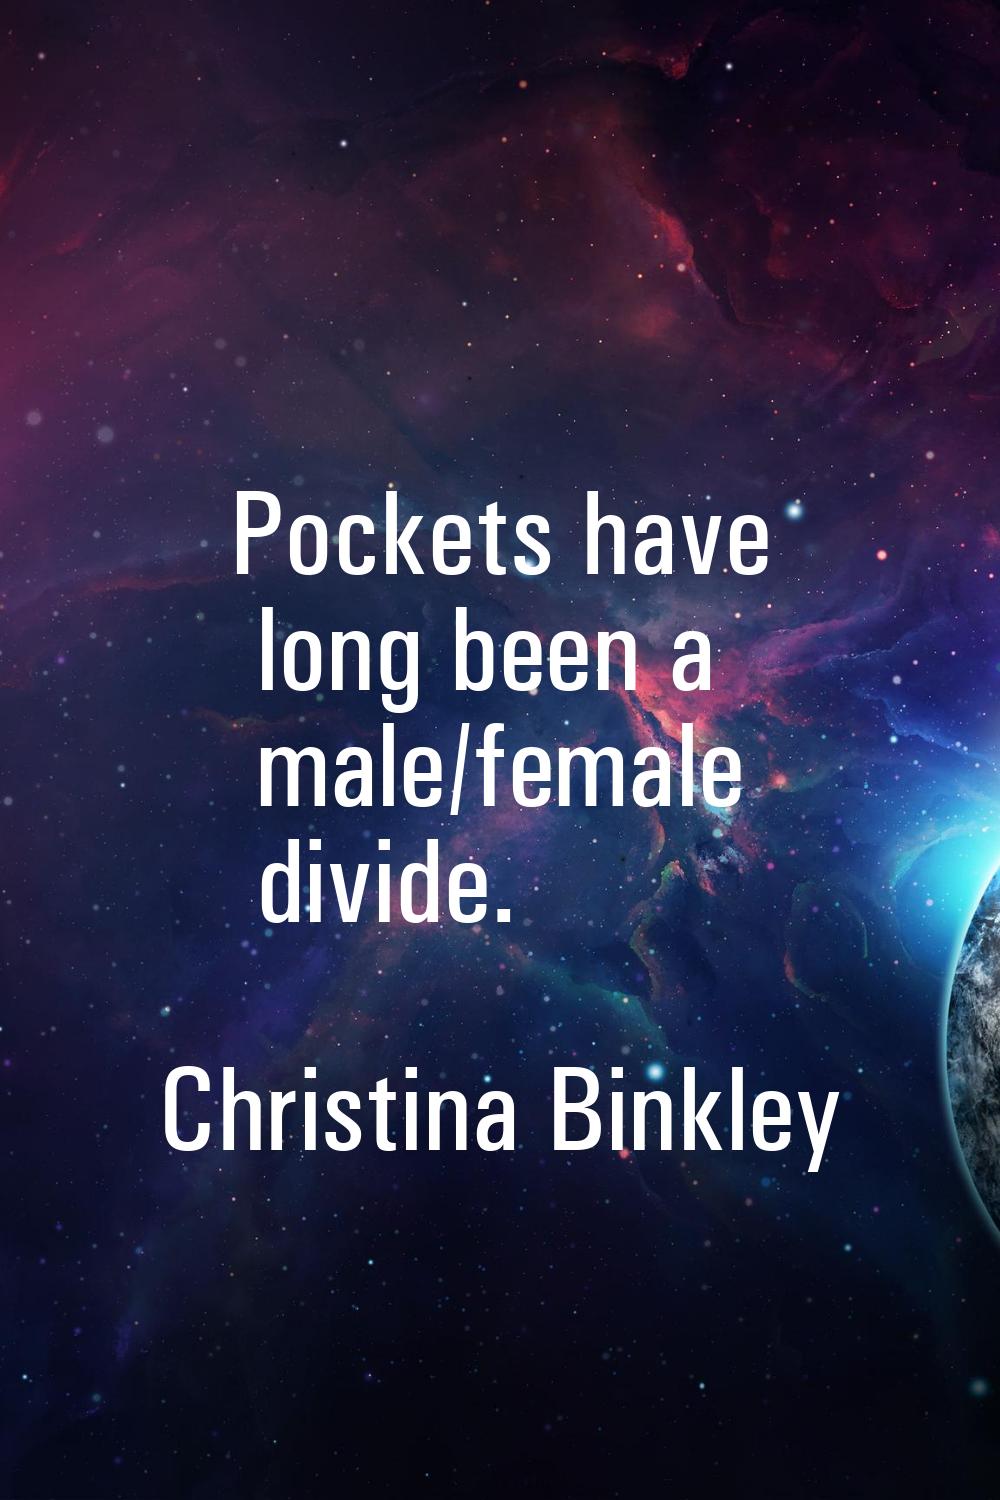 Pockets have long been a male/female divide.